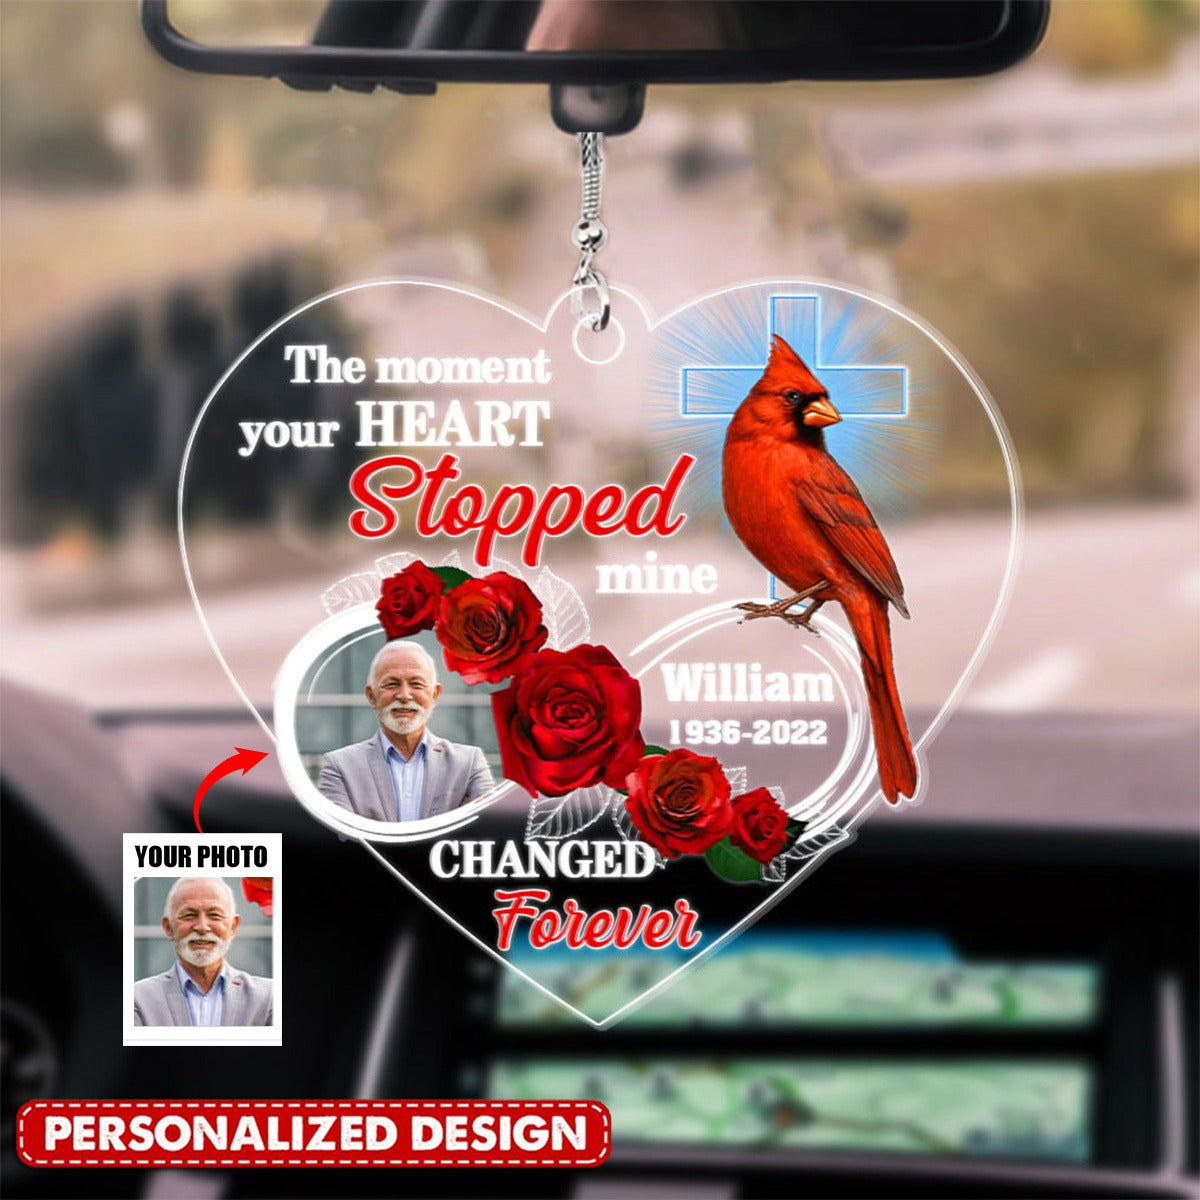 Your Wings Were Ready But My Heart Was Not Upload Photo Personalized Car Ornament